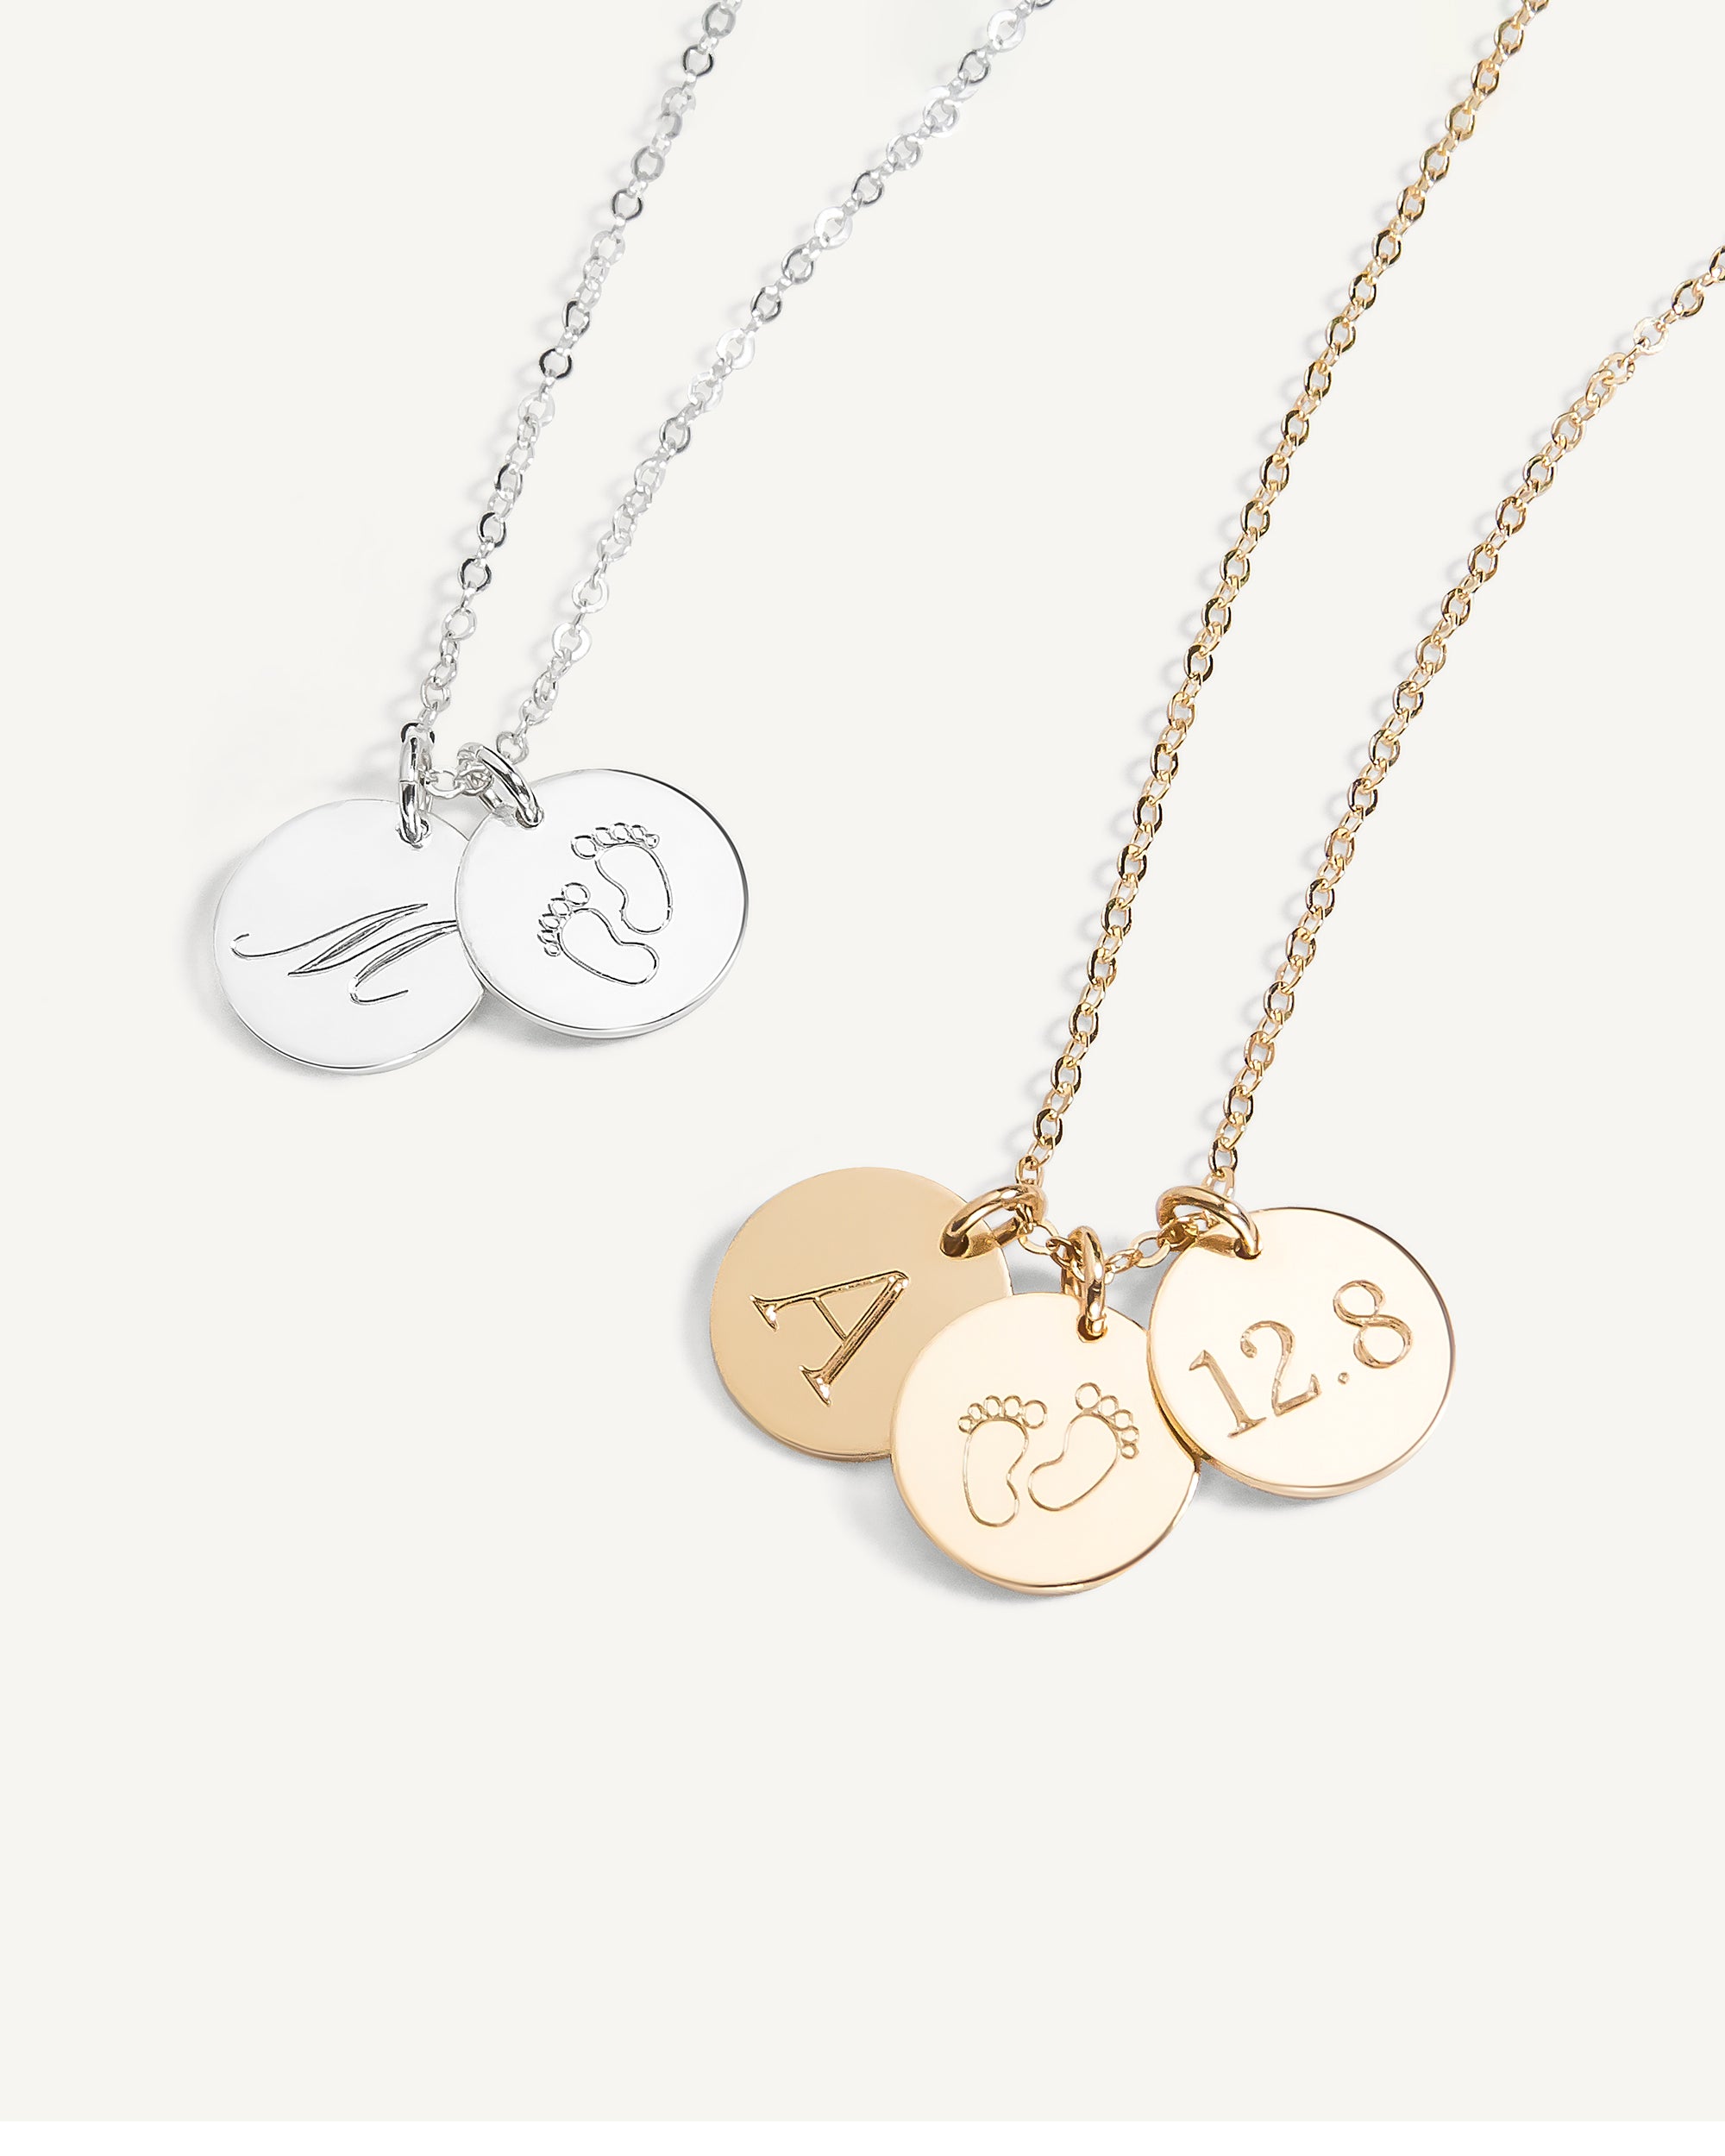 Engraved Initial Necklace – Monday Monarch